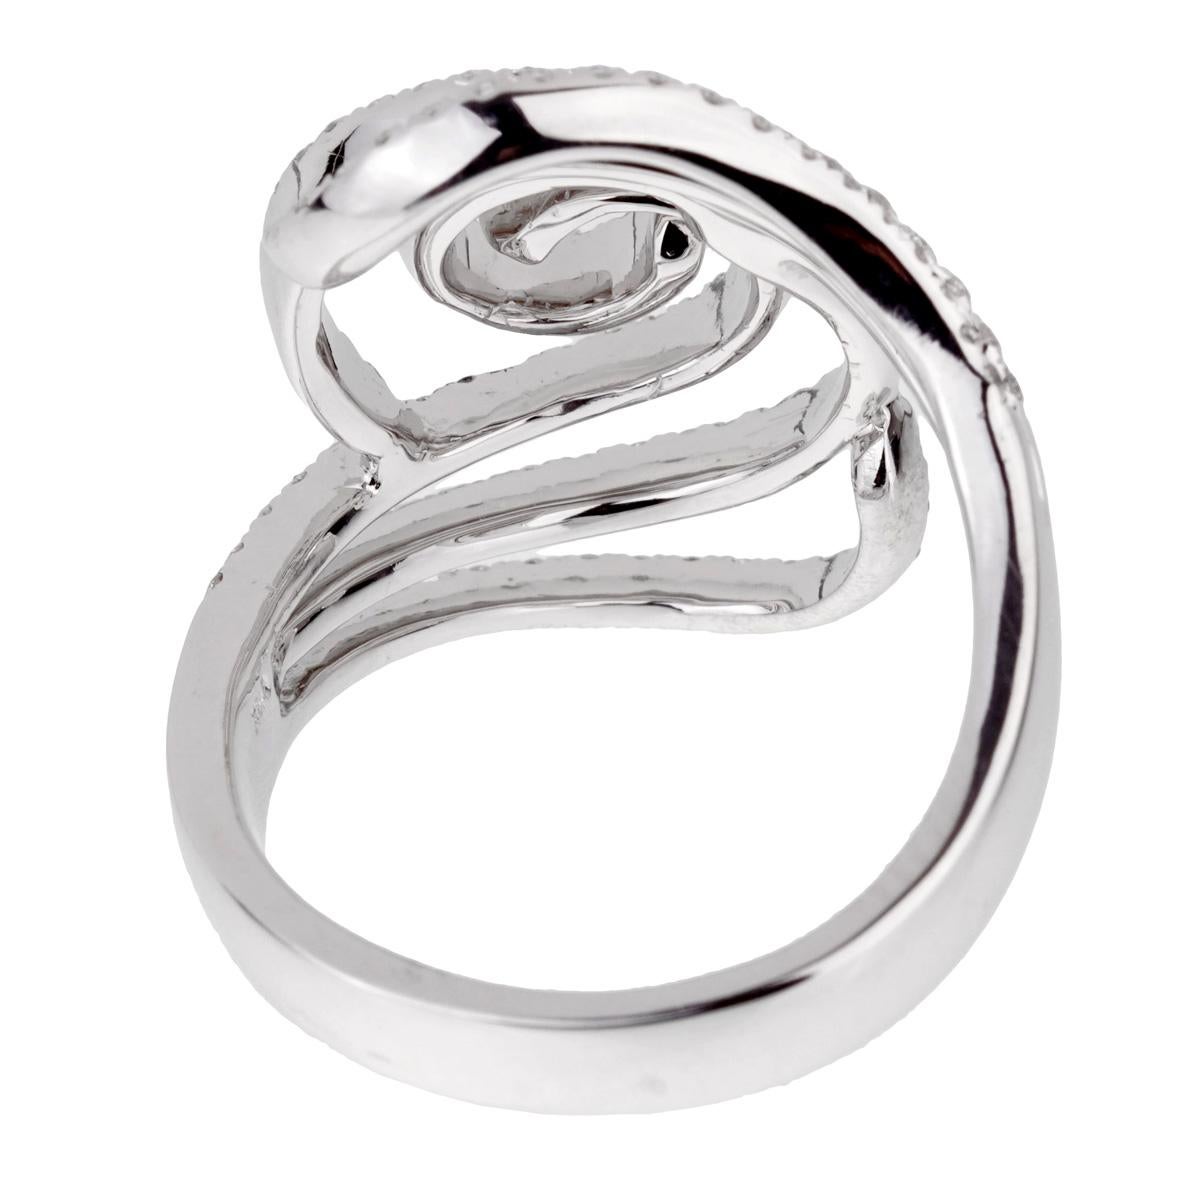 Ladies White Gold Diamond Swirl Cocktail Ring In Excellent Condition For Sale In Feasterville, PA